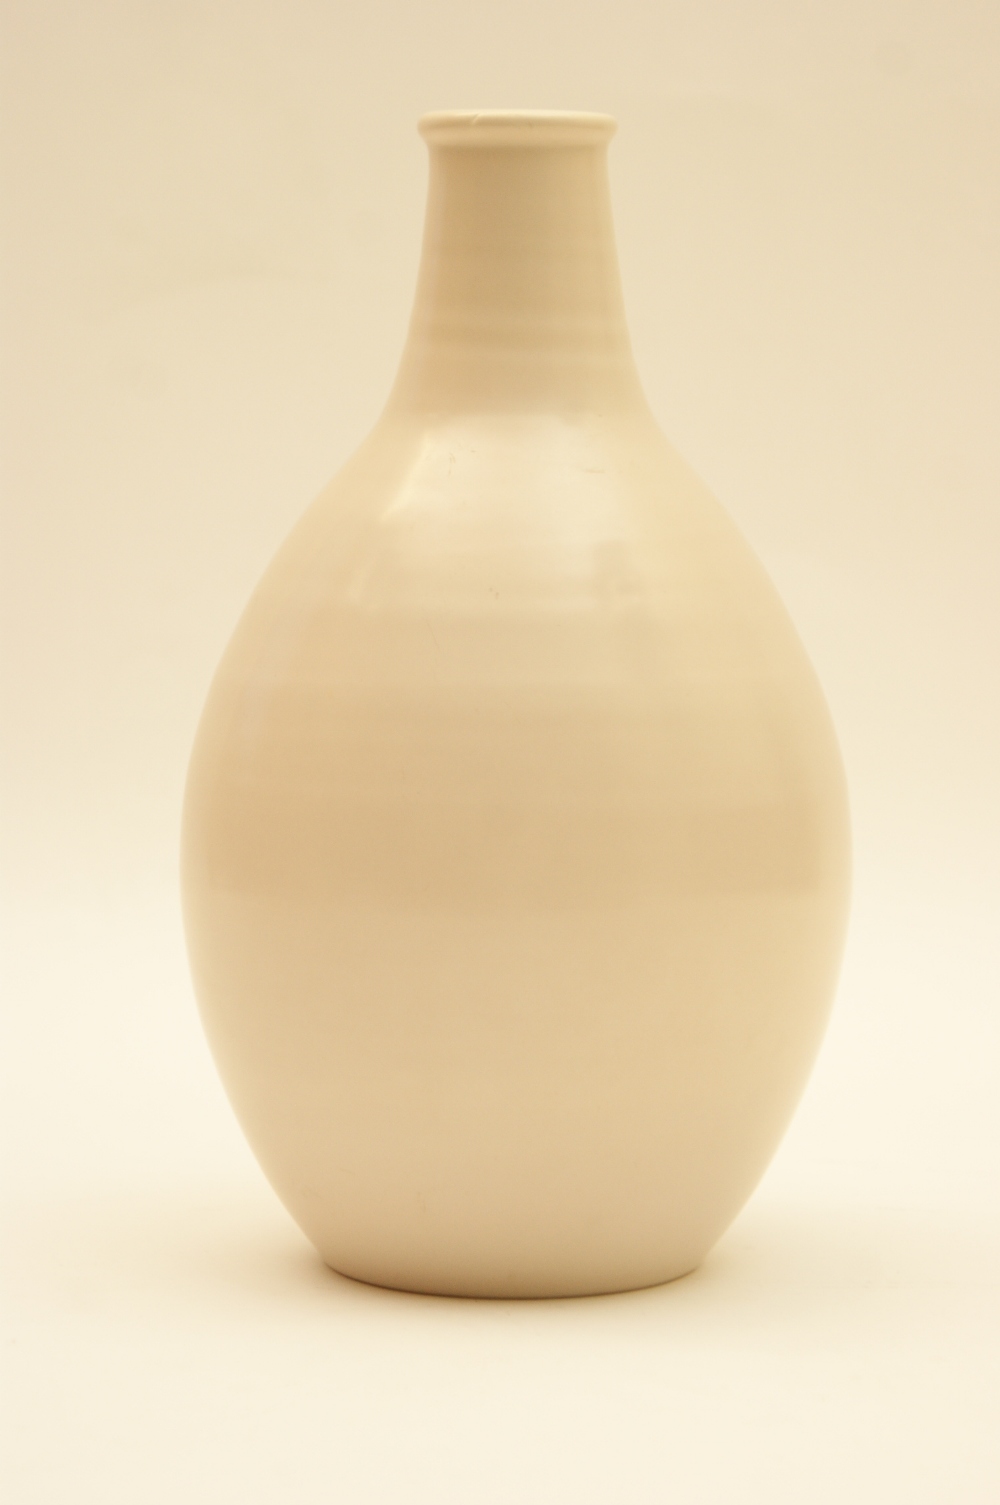 Poole studio vase, ovoid form with short neck and decorated in a plain mushroom glaze, 25cm